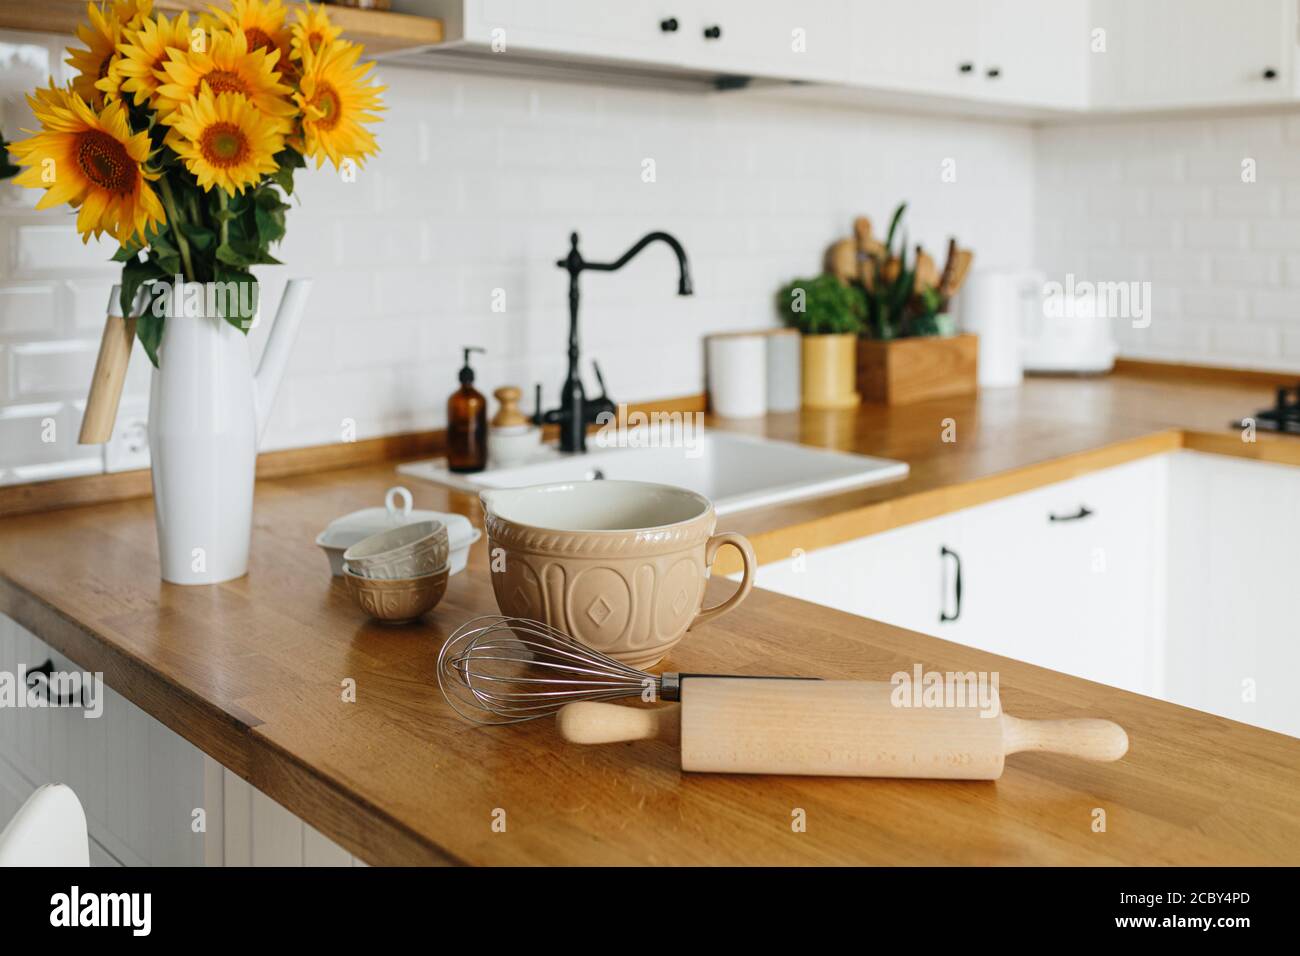 https://c8.alamy.com/comp/2CBY4PD/dishes-and-utensils-on-kitchen-table-ready-to-cook-white-simple-modern-kitchen-in-scandinavian-style-kitchen-details-wooden-table-sunflowers-bouq-2CBY4PD.jpg